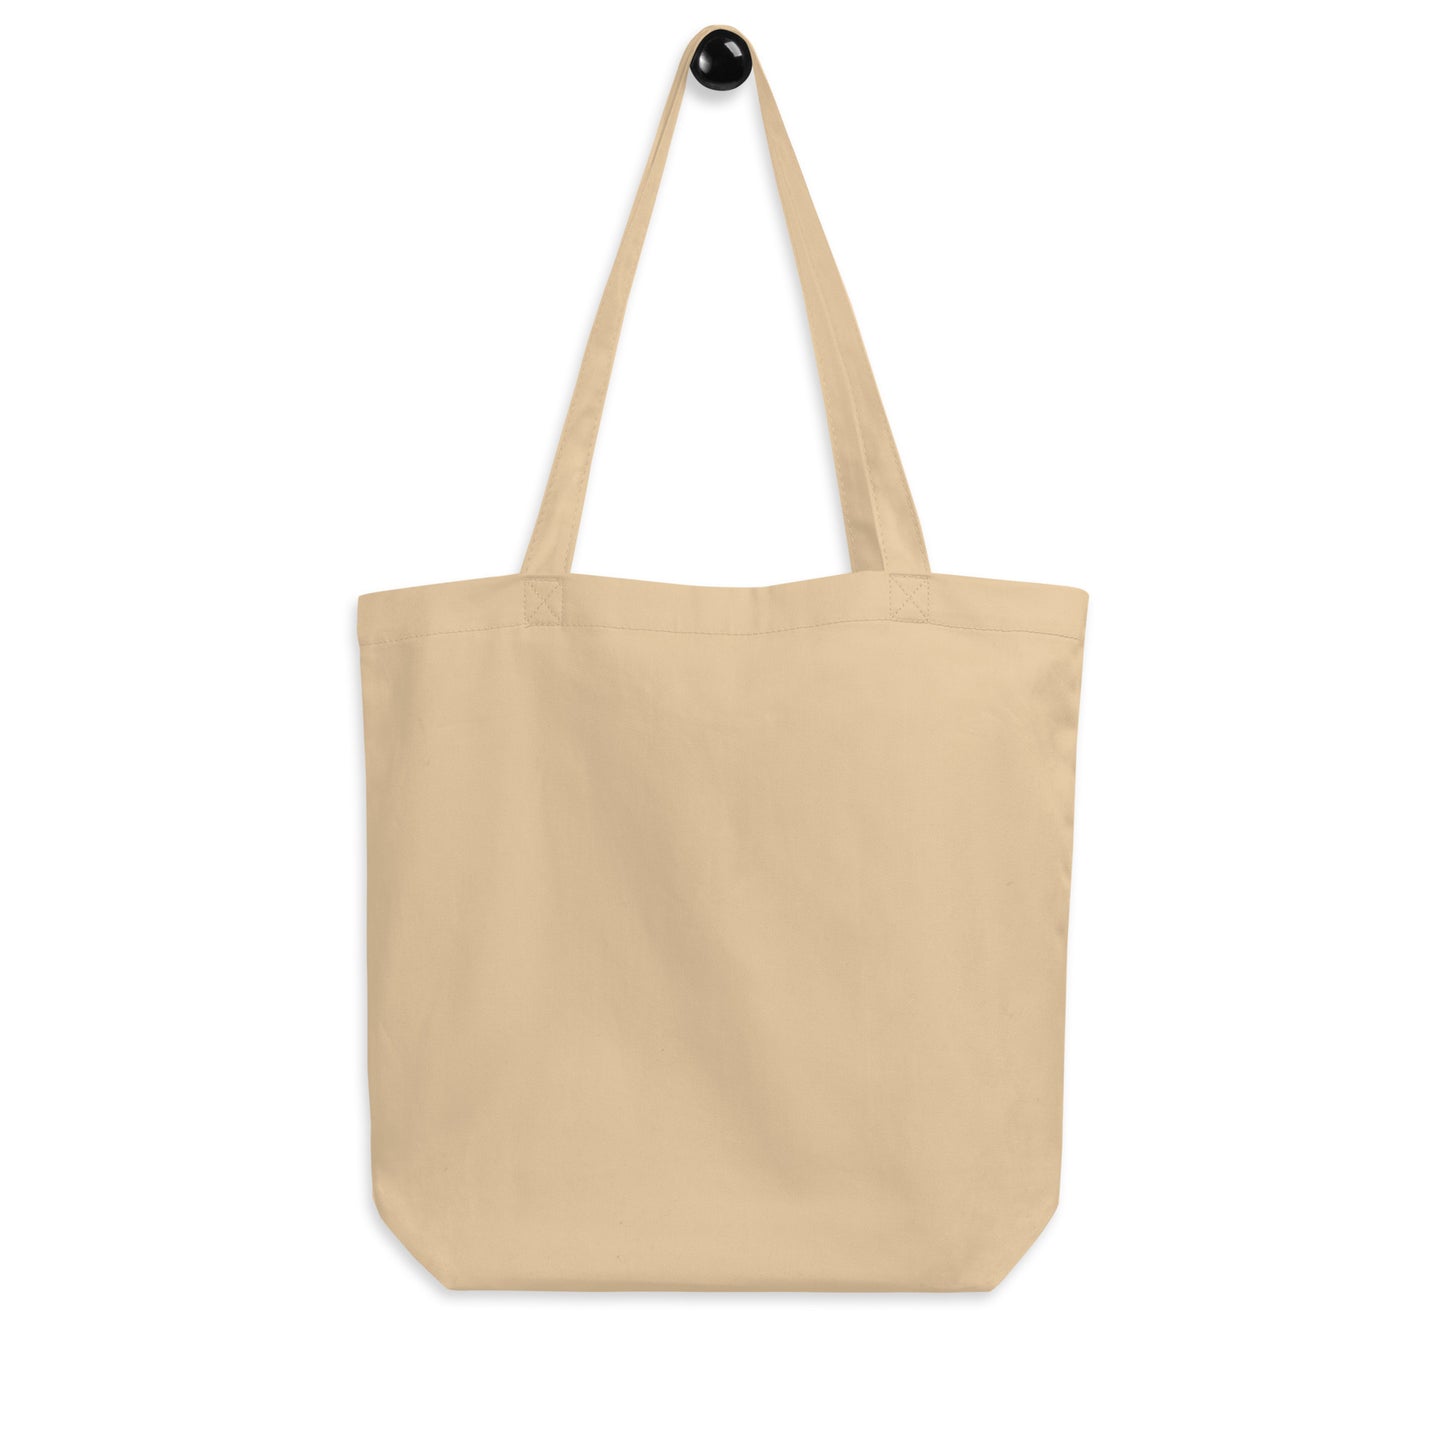 Aviation Gift Organic Tote - Black • MSY New Orleans • YHM Designs - Image 05